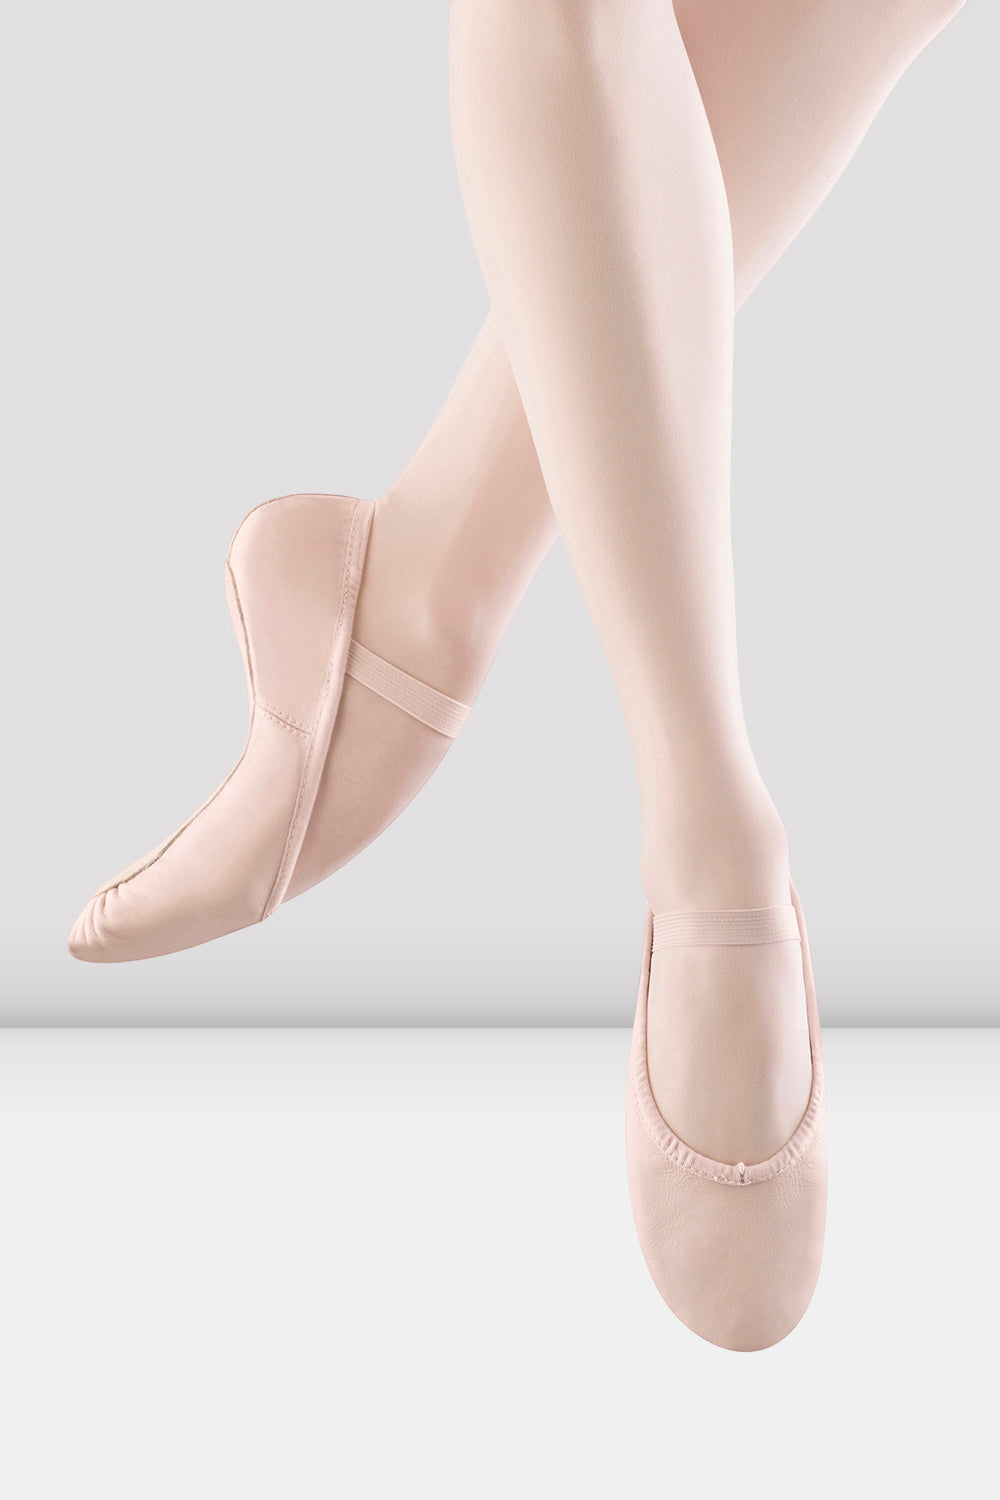 BLOCH Ladies Dansoft Leather Ballet Shoes, Theatrical Pink Leather